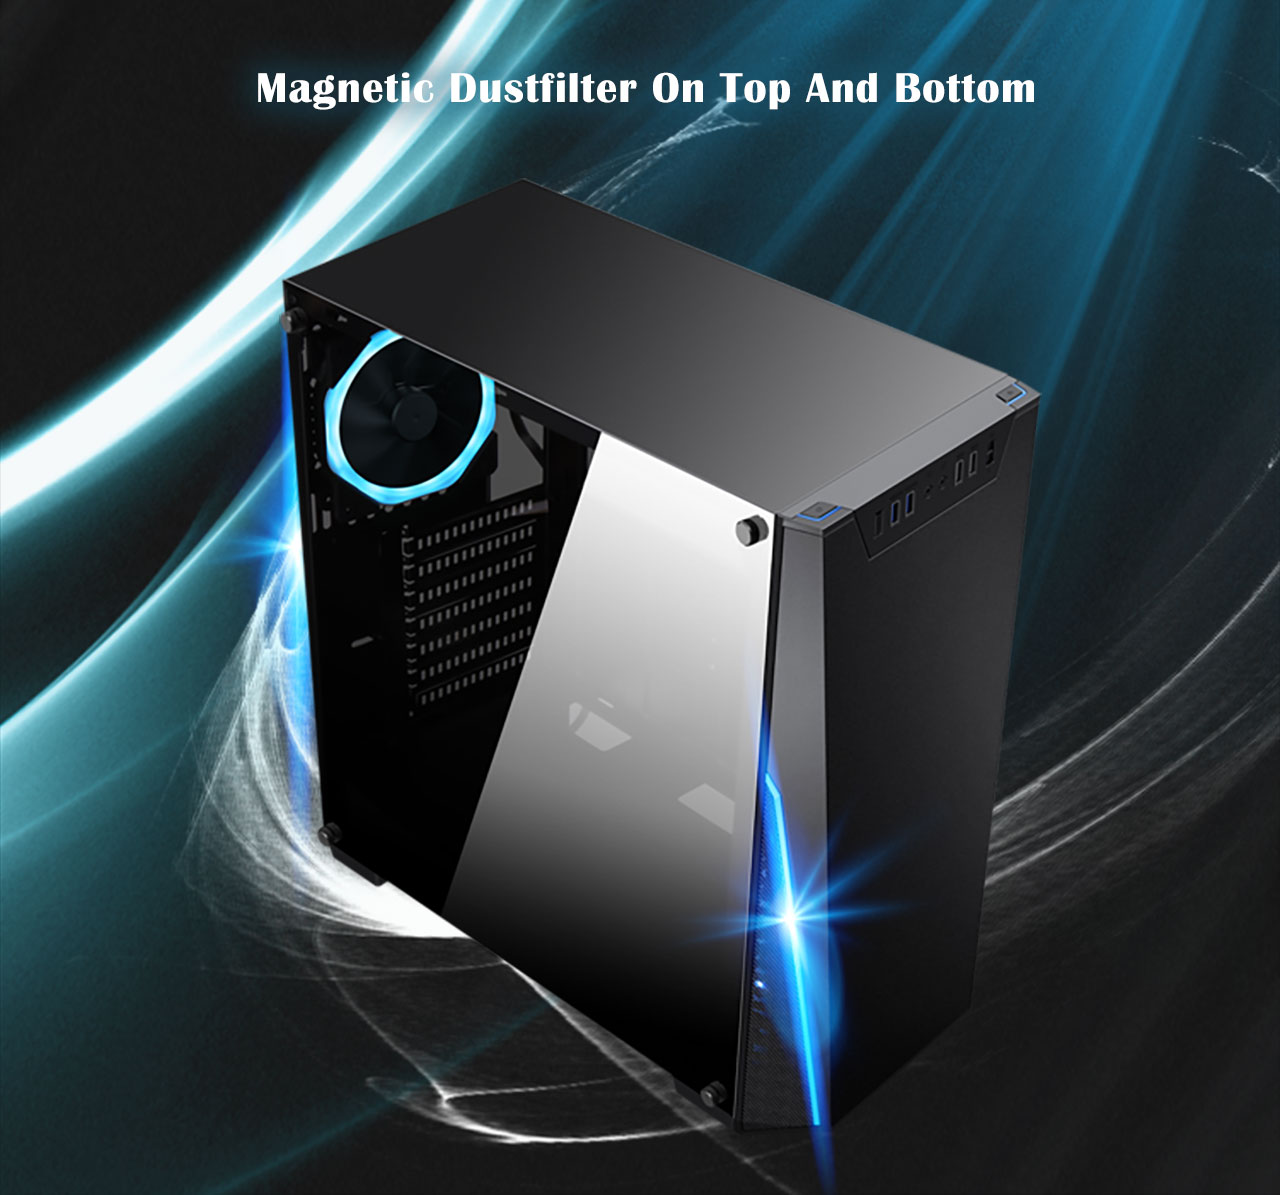 The DIYPC Rainbow-Flash-R1 Case facing slightly to the right with blue-accented lighting. There is text above the case that reads: Magnetic Dust filter on top and bottom